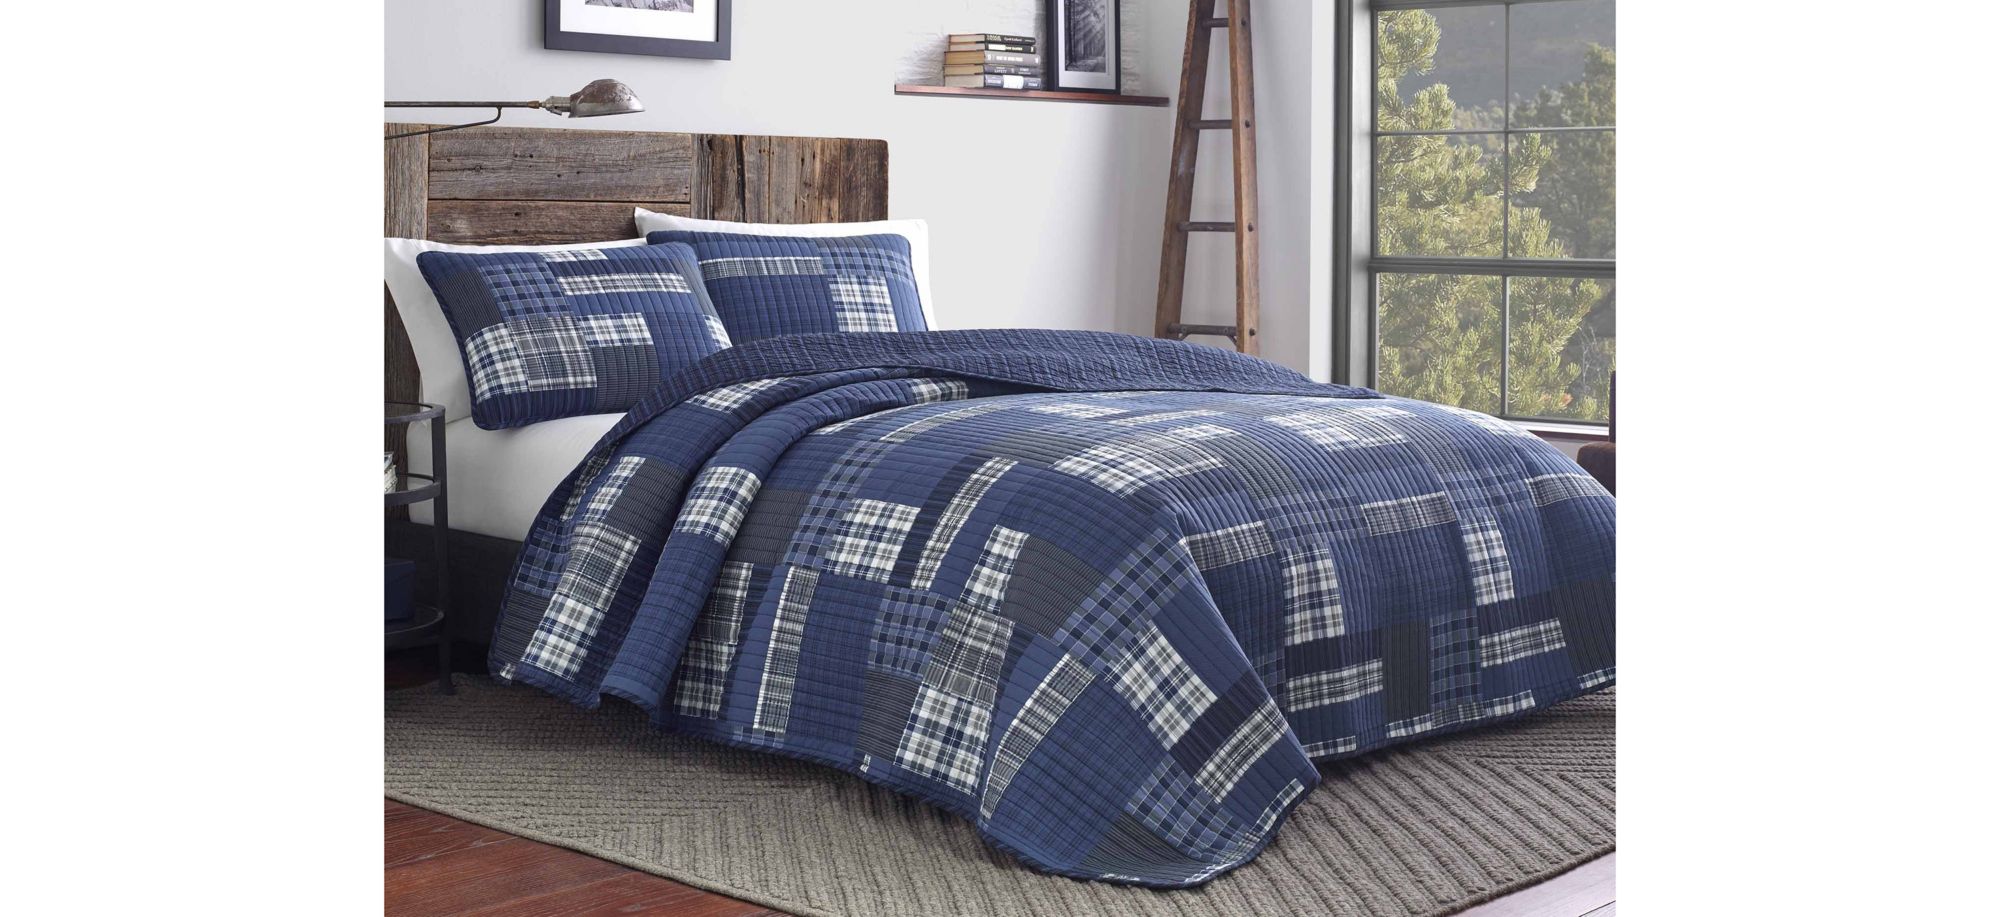 Eastmont 3-pc. Quilt Set in NAVY by Revman International